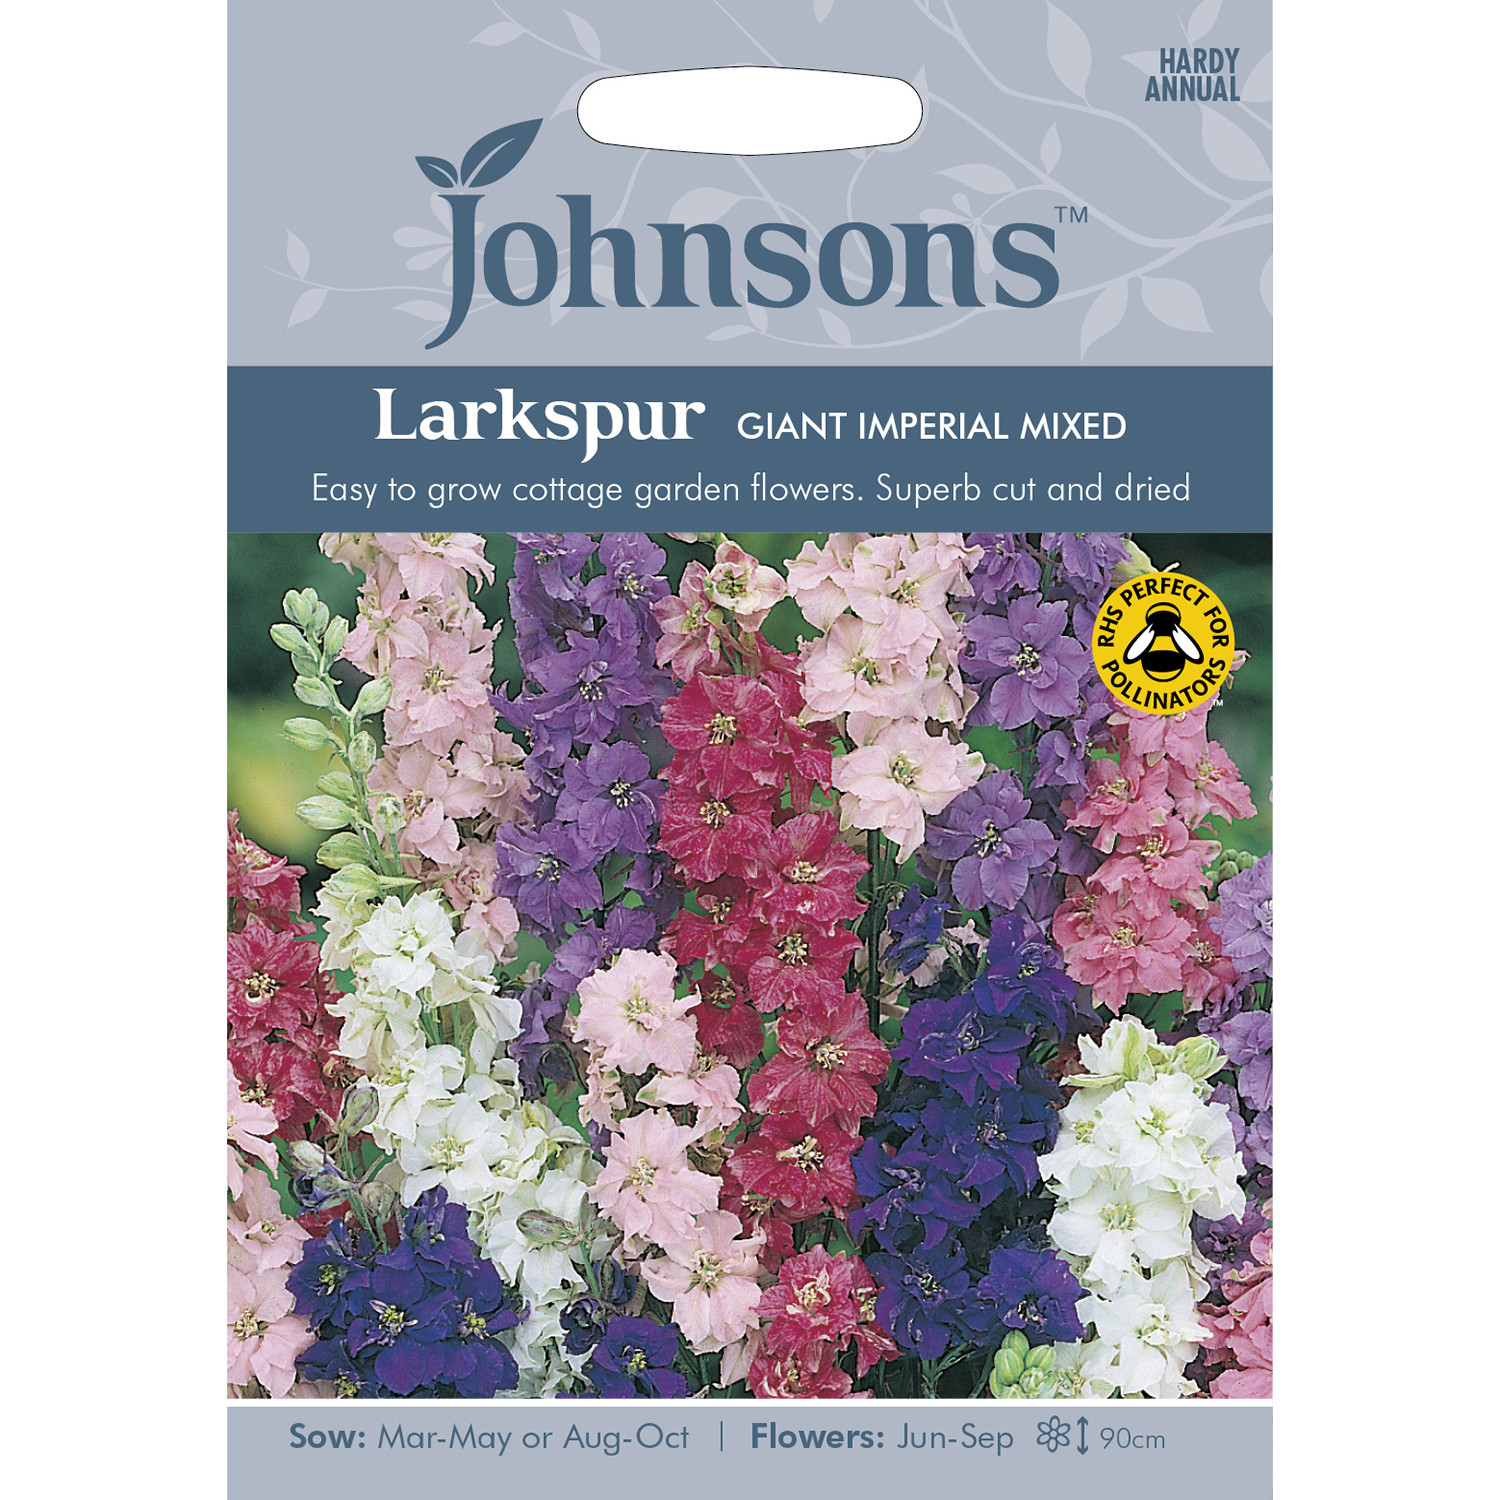 Johnsons Larkspur Giant Imperial Mixed Flower Seeds Image 2